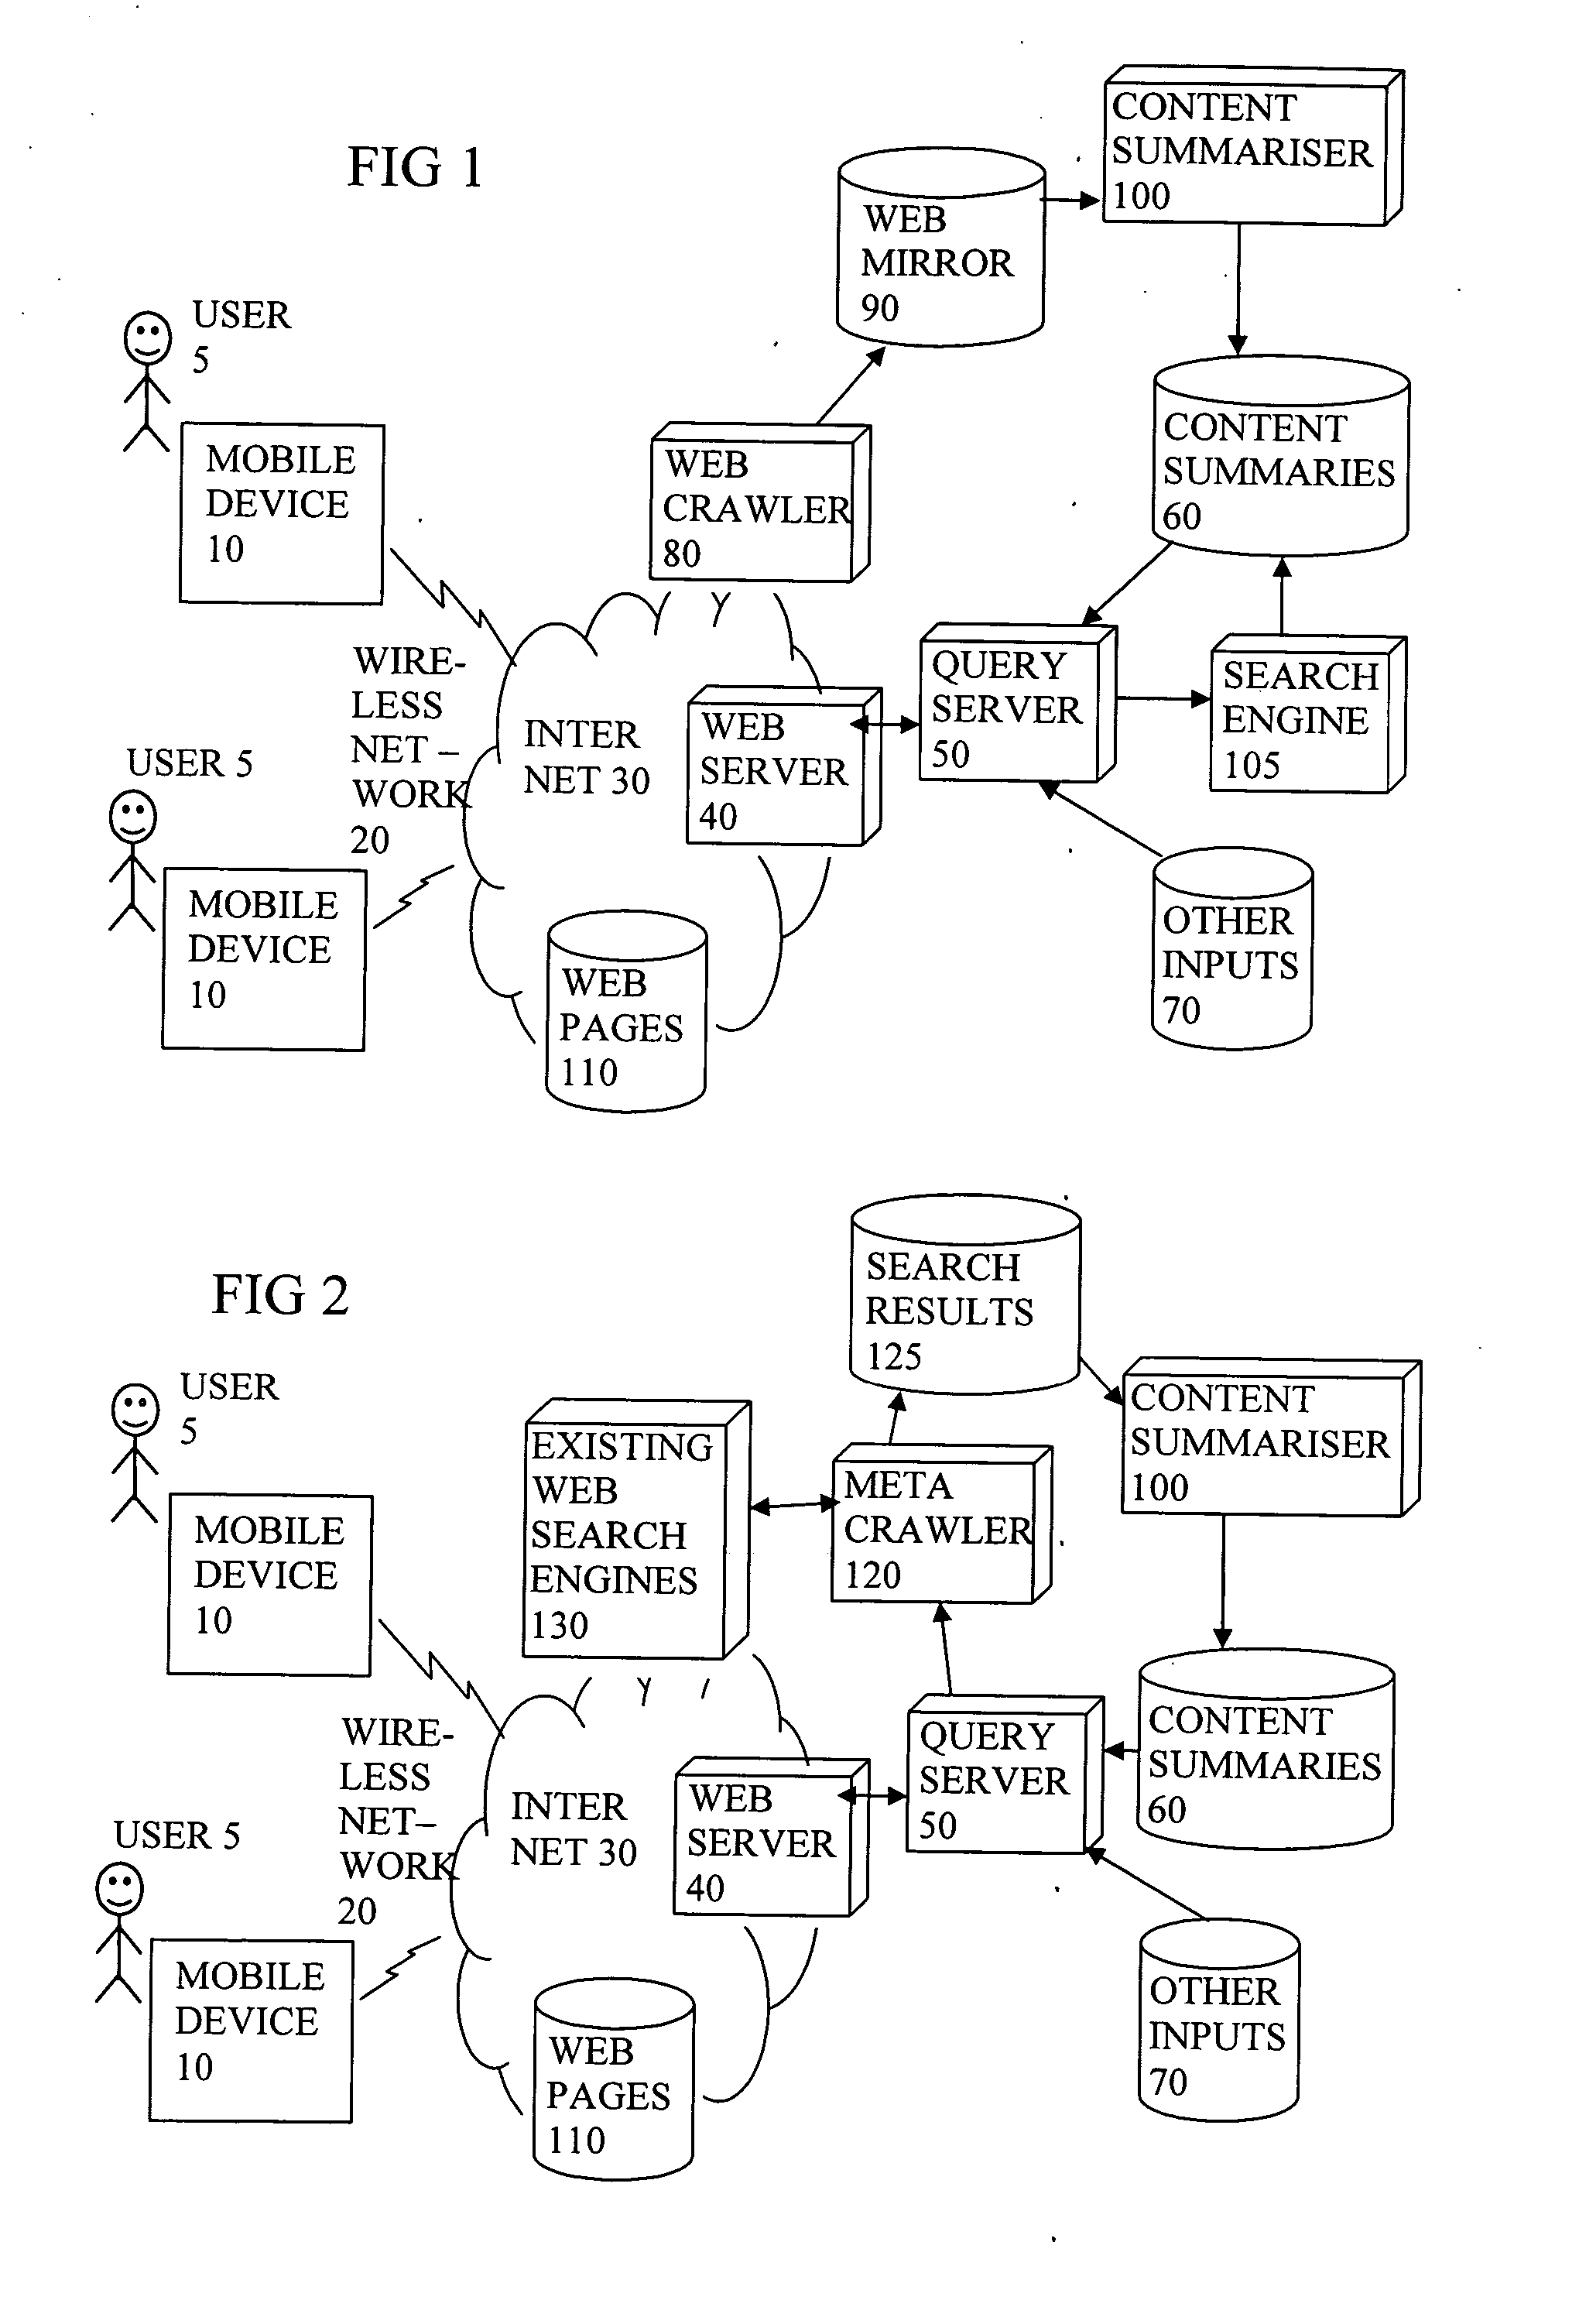 Processing and sending search results over a wireless network to a mobile device